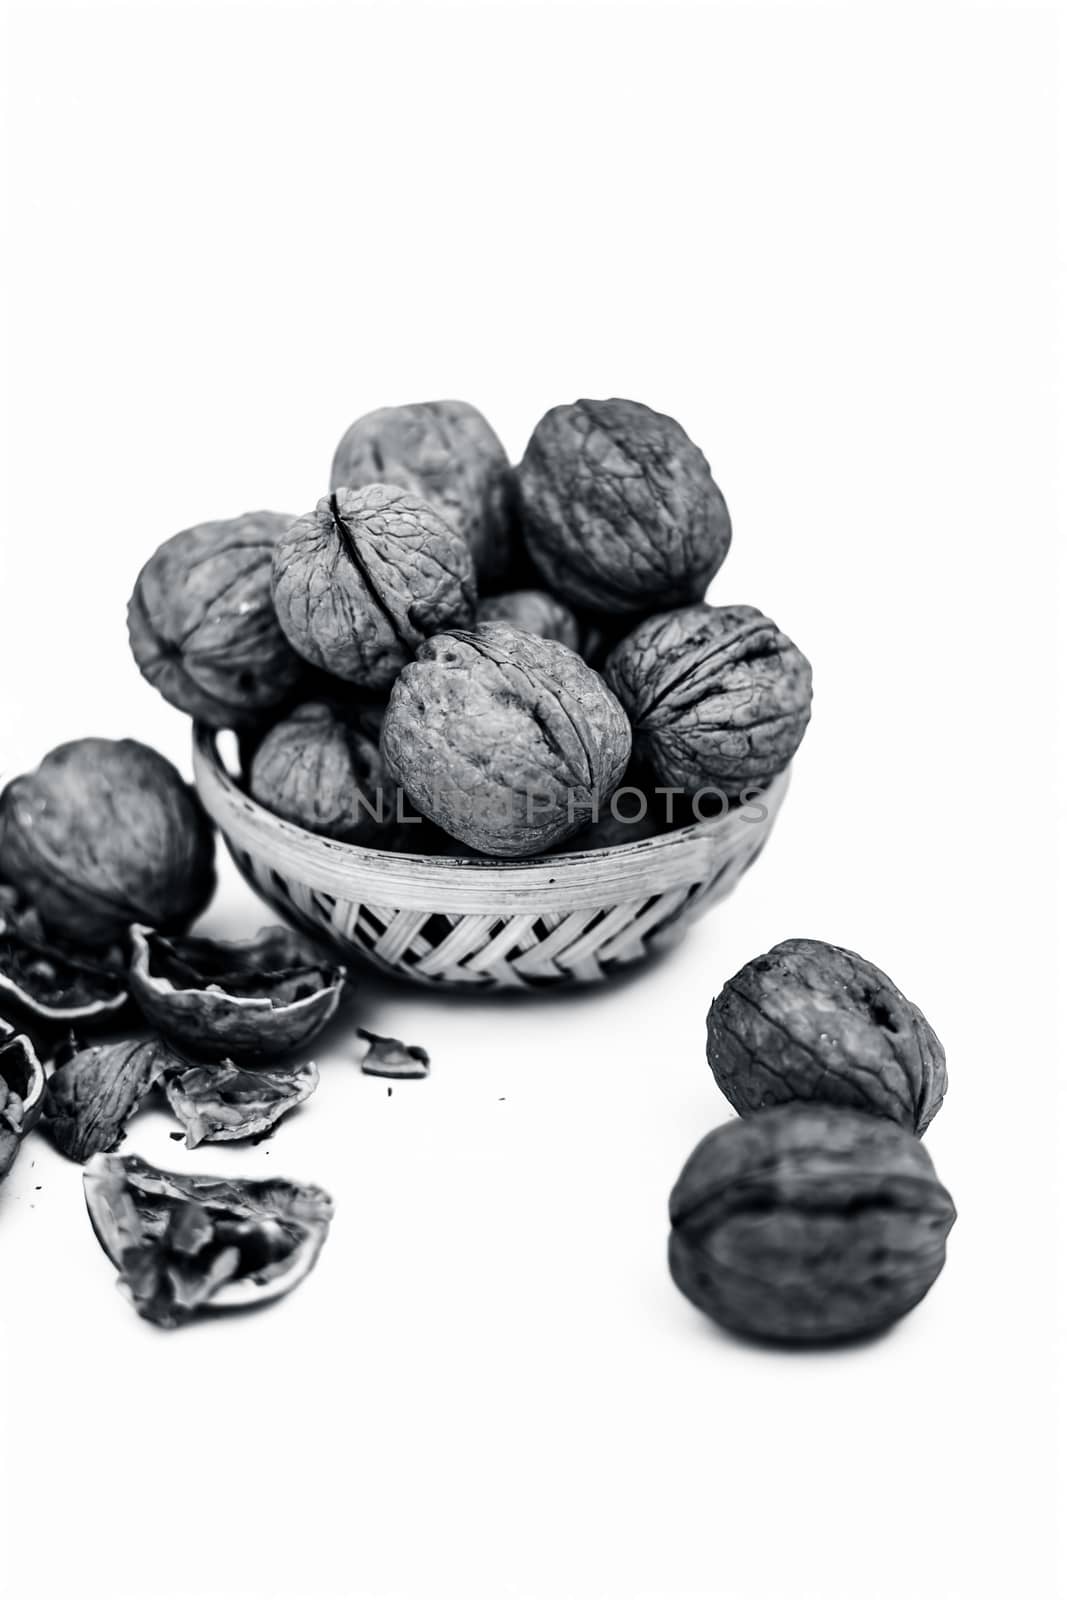 Close up of essential oil or essence of walnut or akhrot isolated on white in a small transparent glass bottle along with raw in shell walnuts or Juglans.